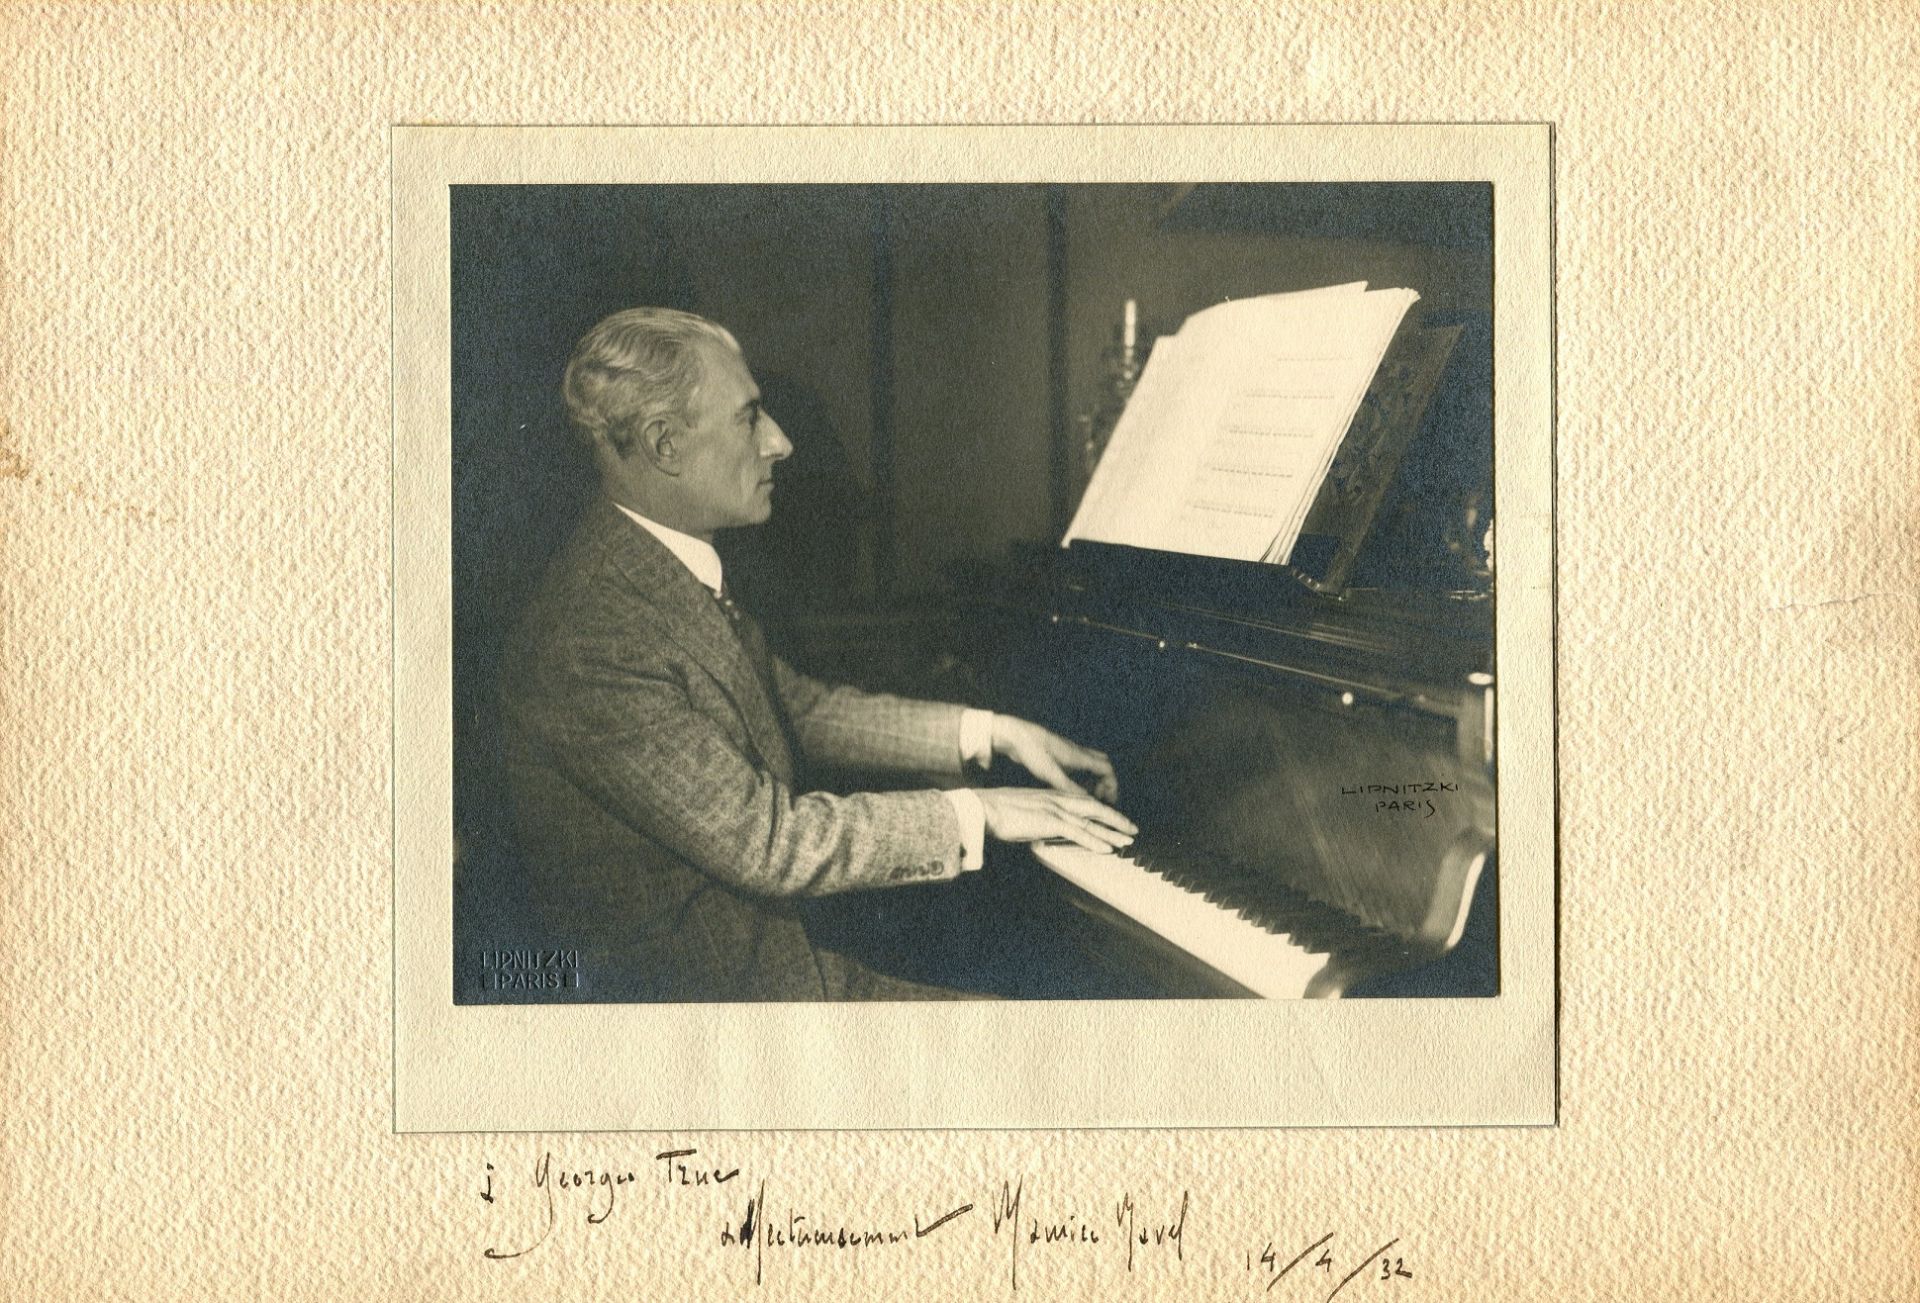 RAVEL MAURICE: (1875-1937) French Composer. A good signed and inscribed oblong 11 x 7.